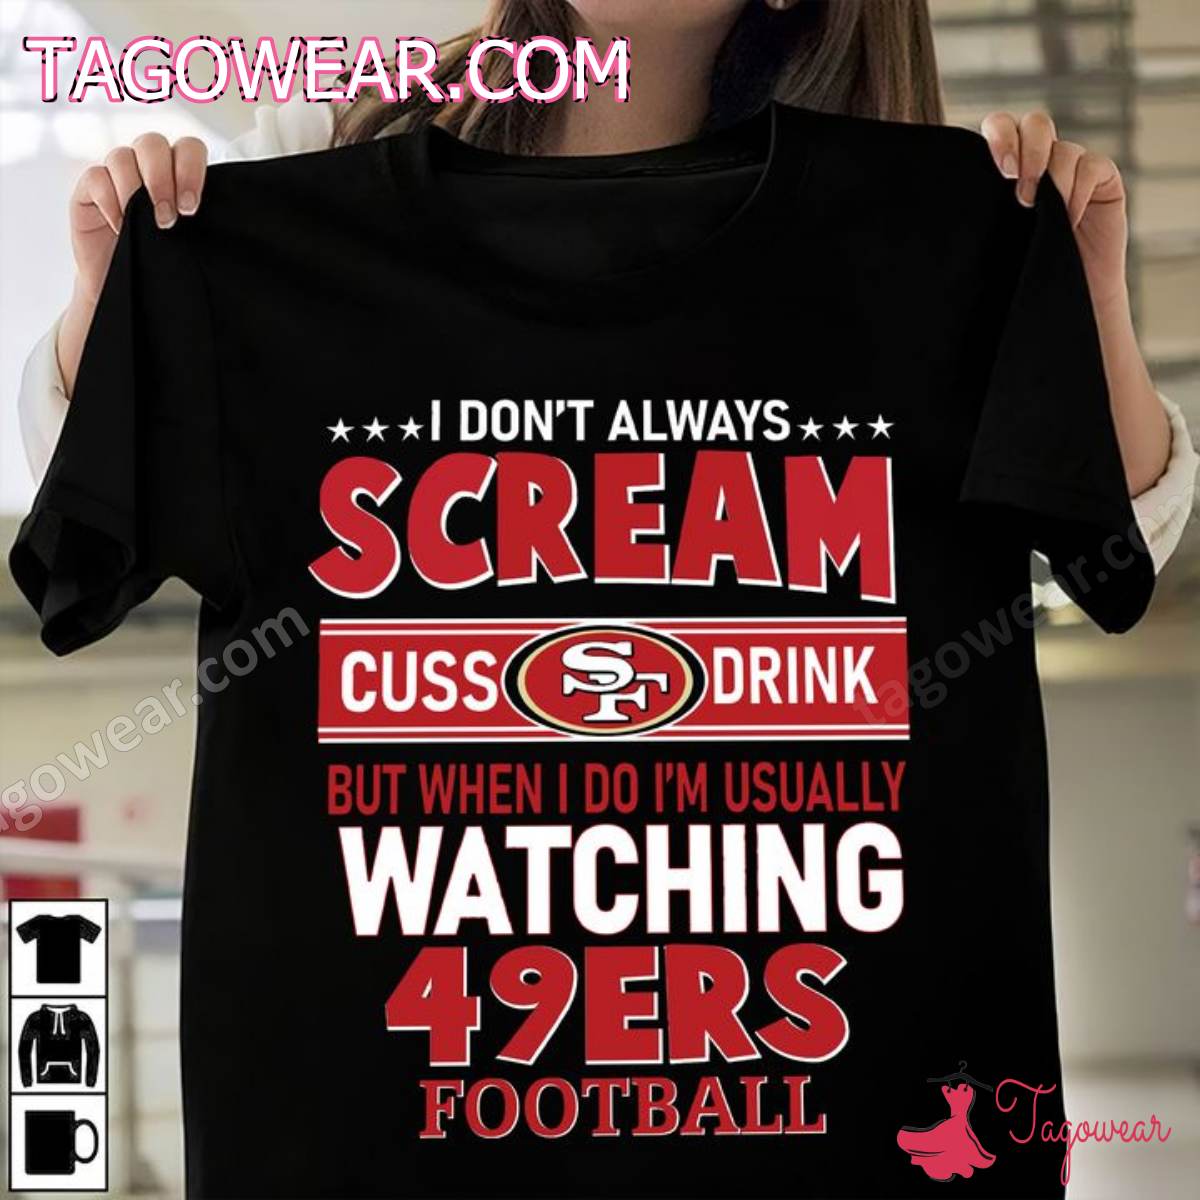 I Don't Always Scream Cuss Drink But When I Do I'm Usually Watching 49ers Football Shirt